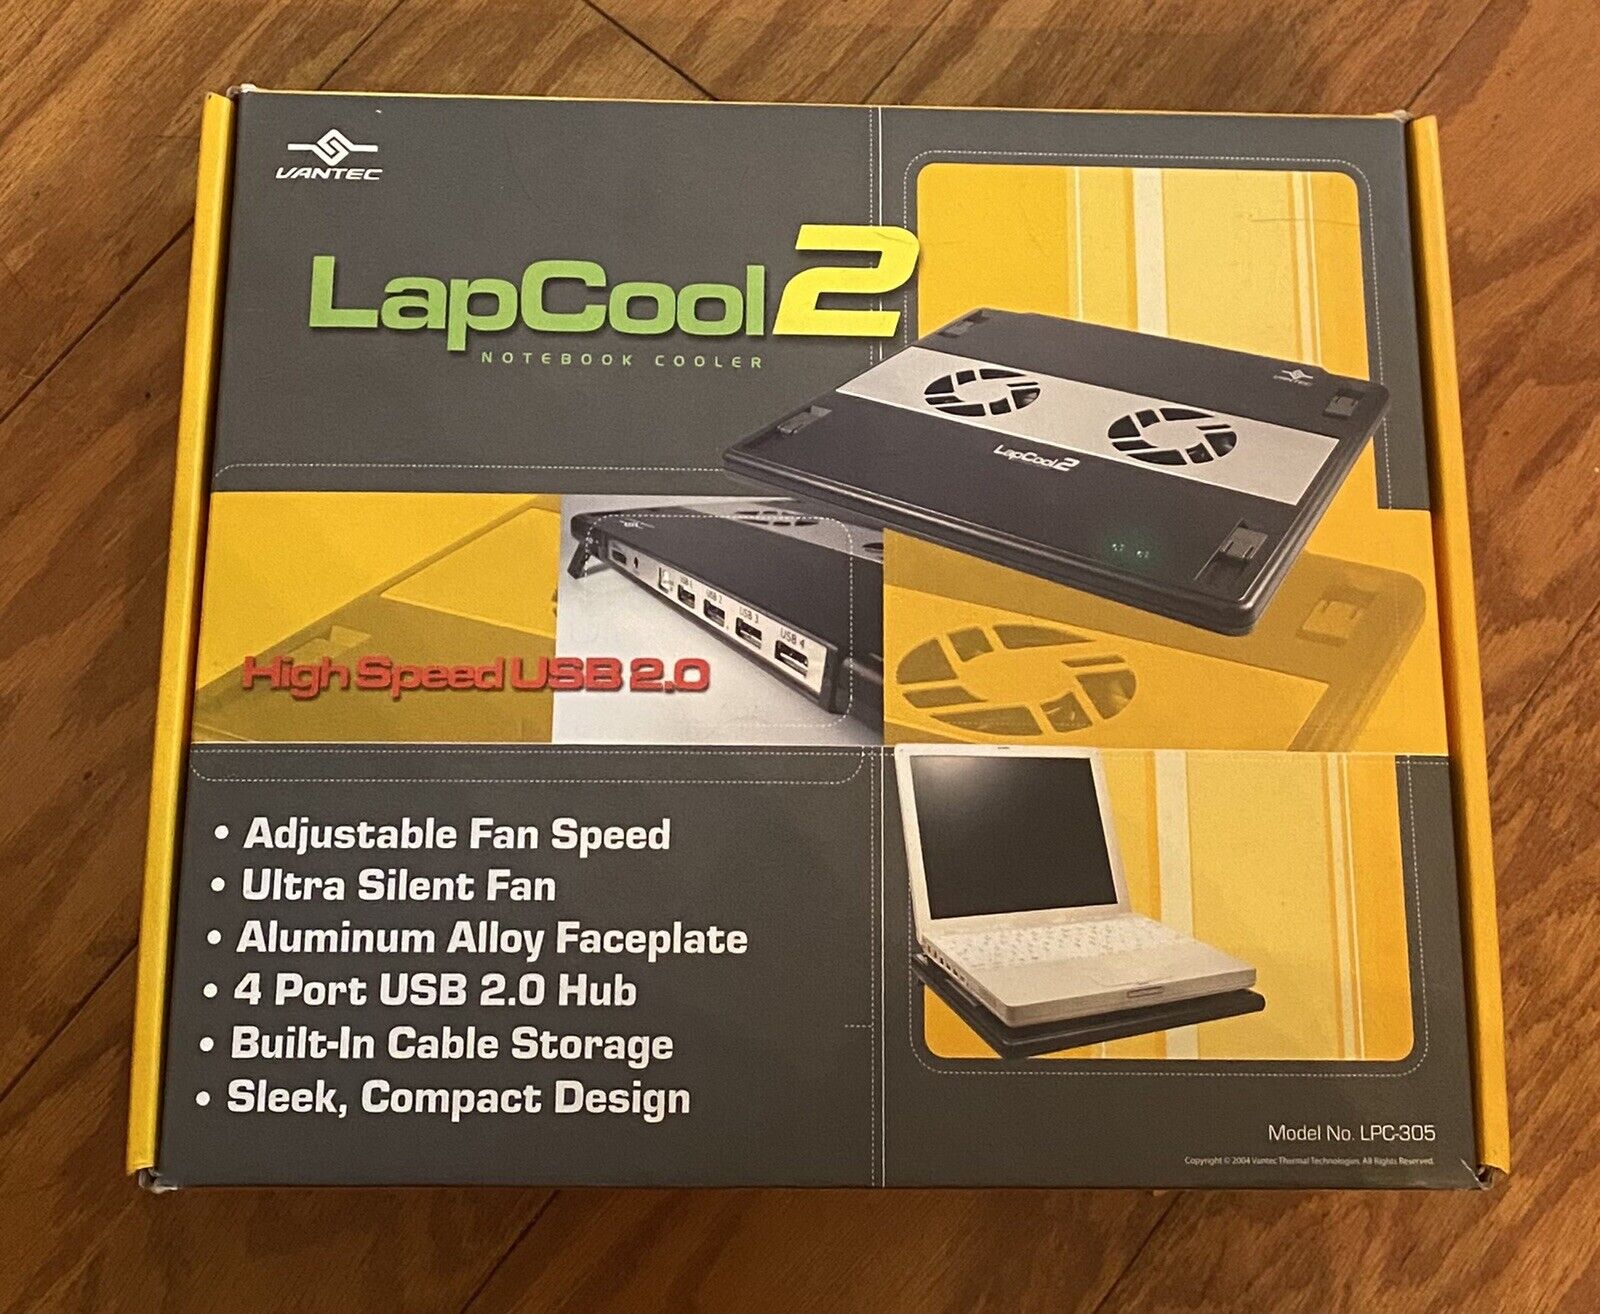 Vantec LapCool 2 Notebook Cooler. High Speed USB 2.0. Tested